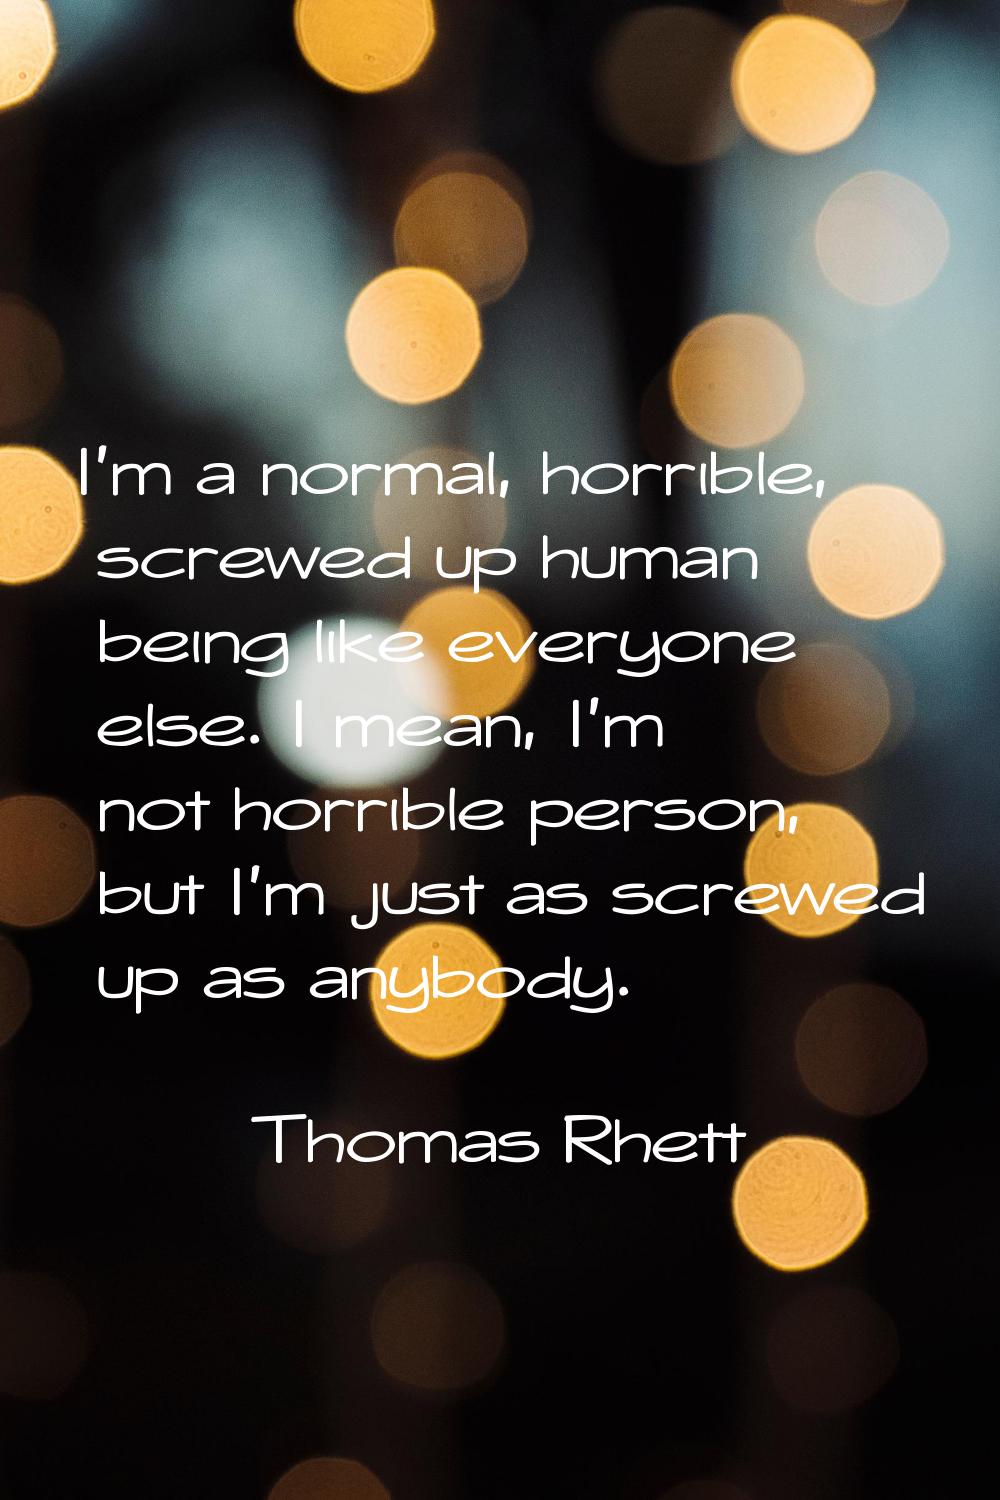 I'm a normal, horrible, screwed up human being like everyone else. I mean, I'm not horrible person,